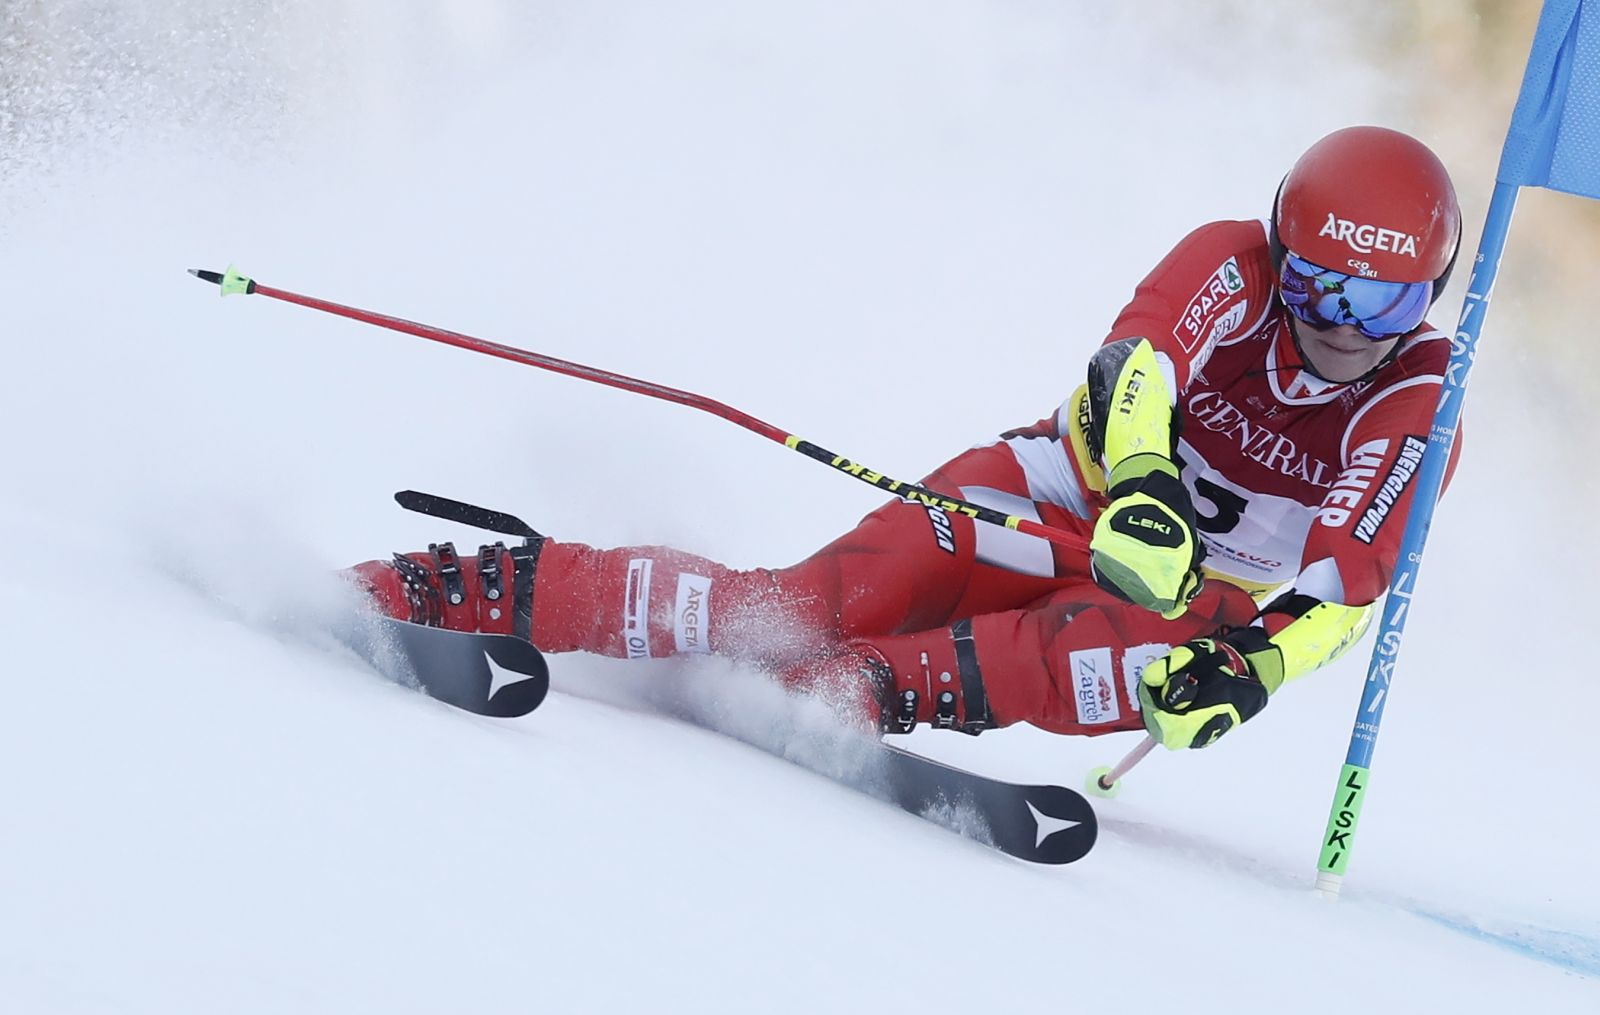 epa10472228 Filip Zubcic of Croatia cuts a gate during the 1st run in the Men's Giant Slalom event at the FIS Alpine Skiing World Championships in Courchevel, France, 17 February 2023.  EPA/GUILLAUME HORCAJUELO